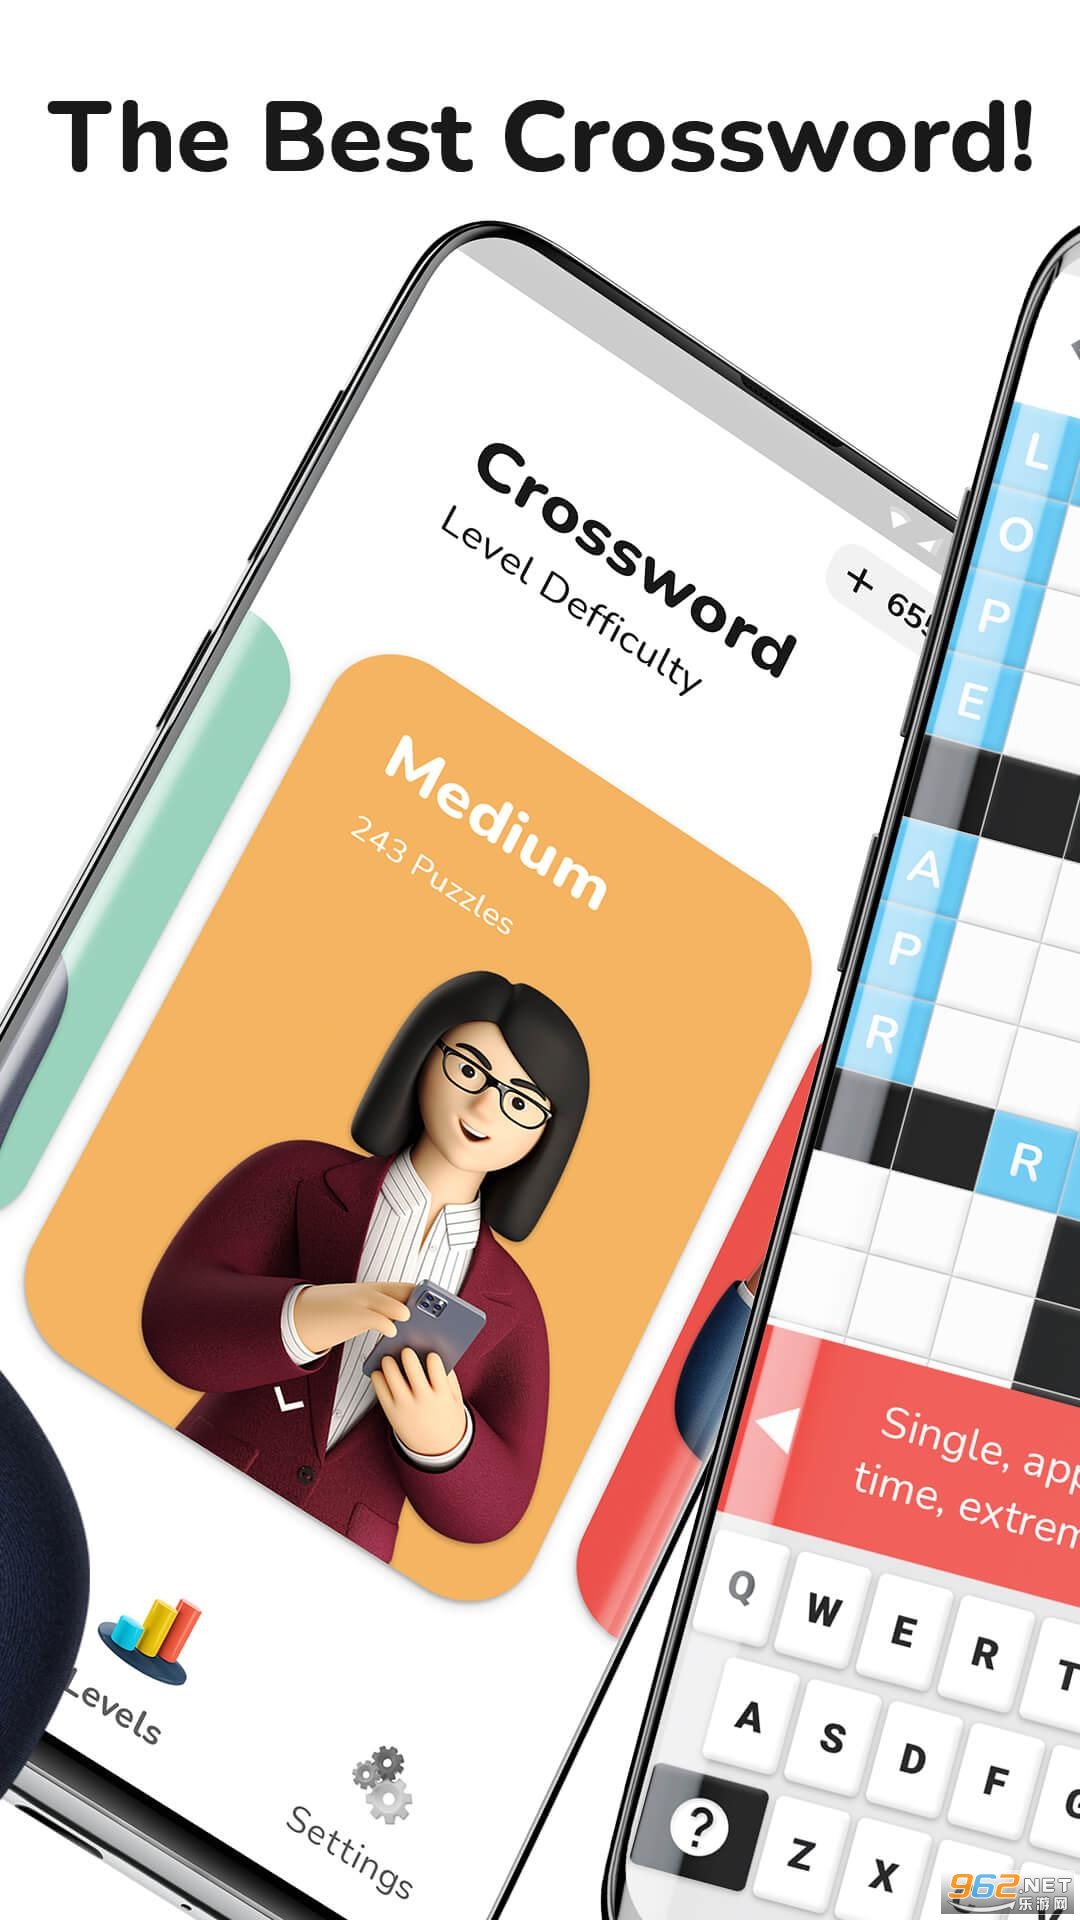 The Crossword Puzzle(Crossword Puzzle Game for Pros and BeginnersϷ)v9 ׿ͼ0